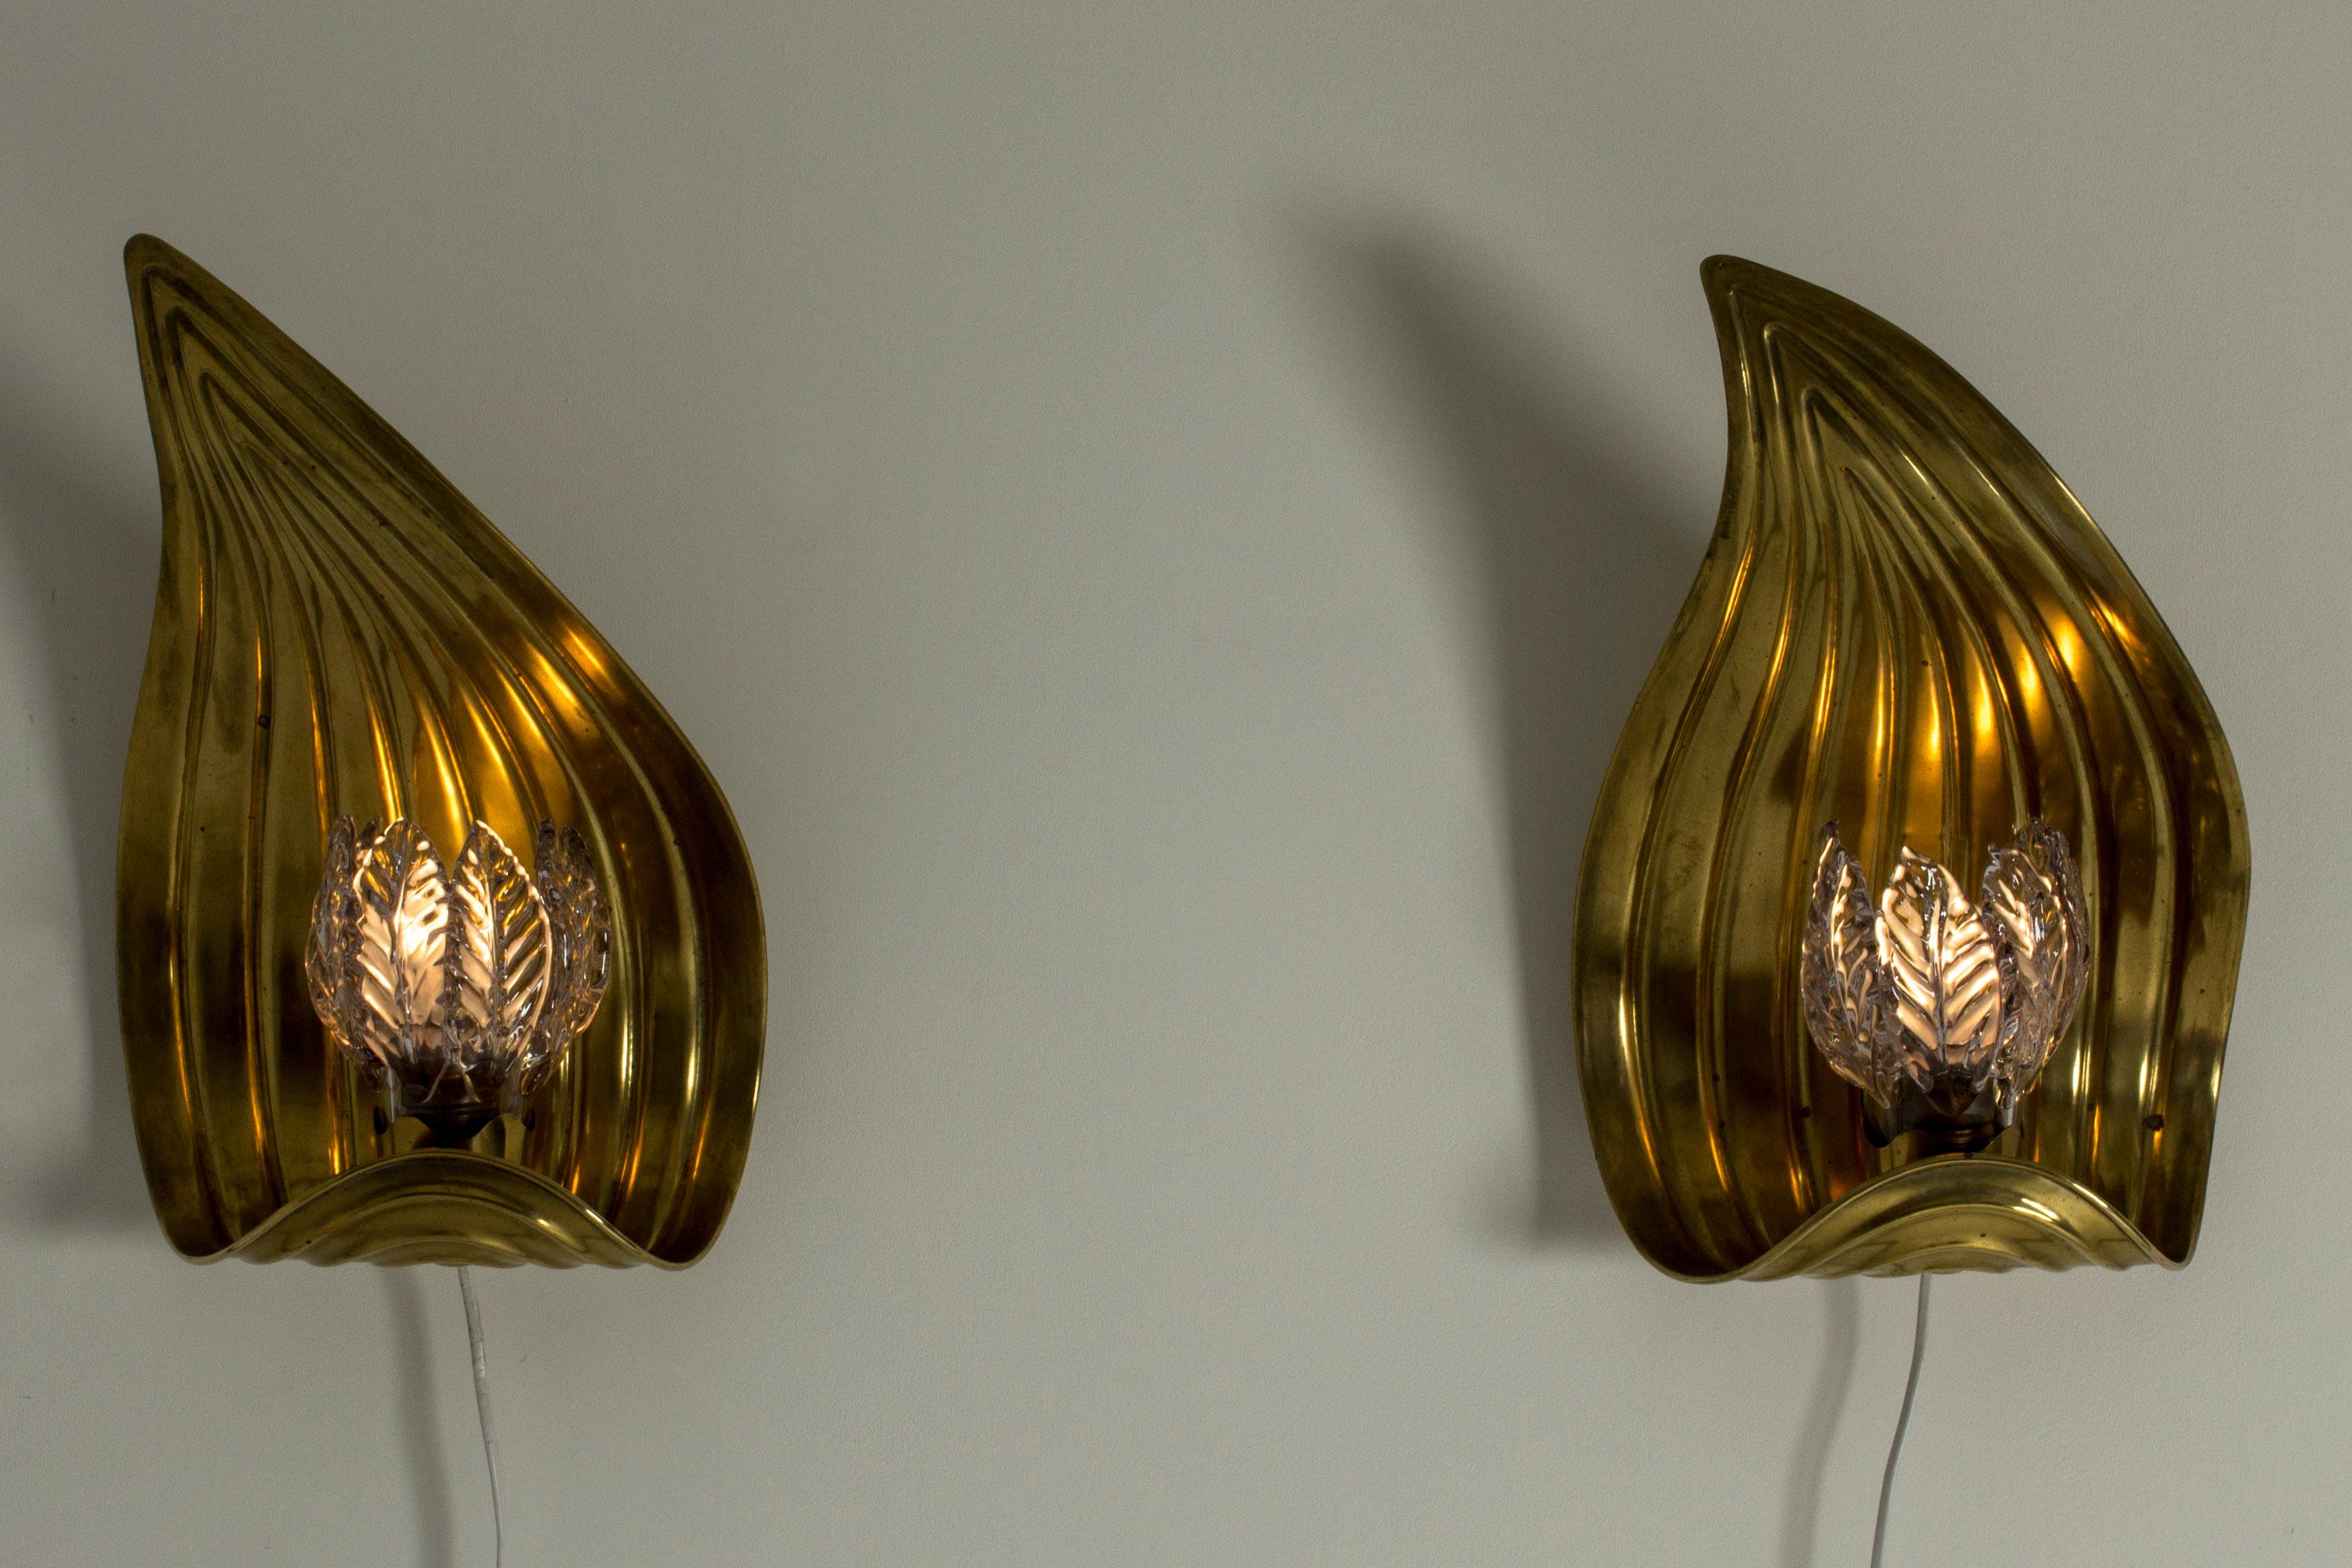 Pair of Glass and Brass Swedish Modern Wall Lights, 1940s For Sale 4